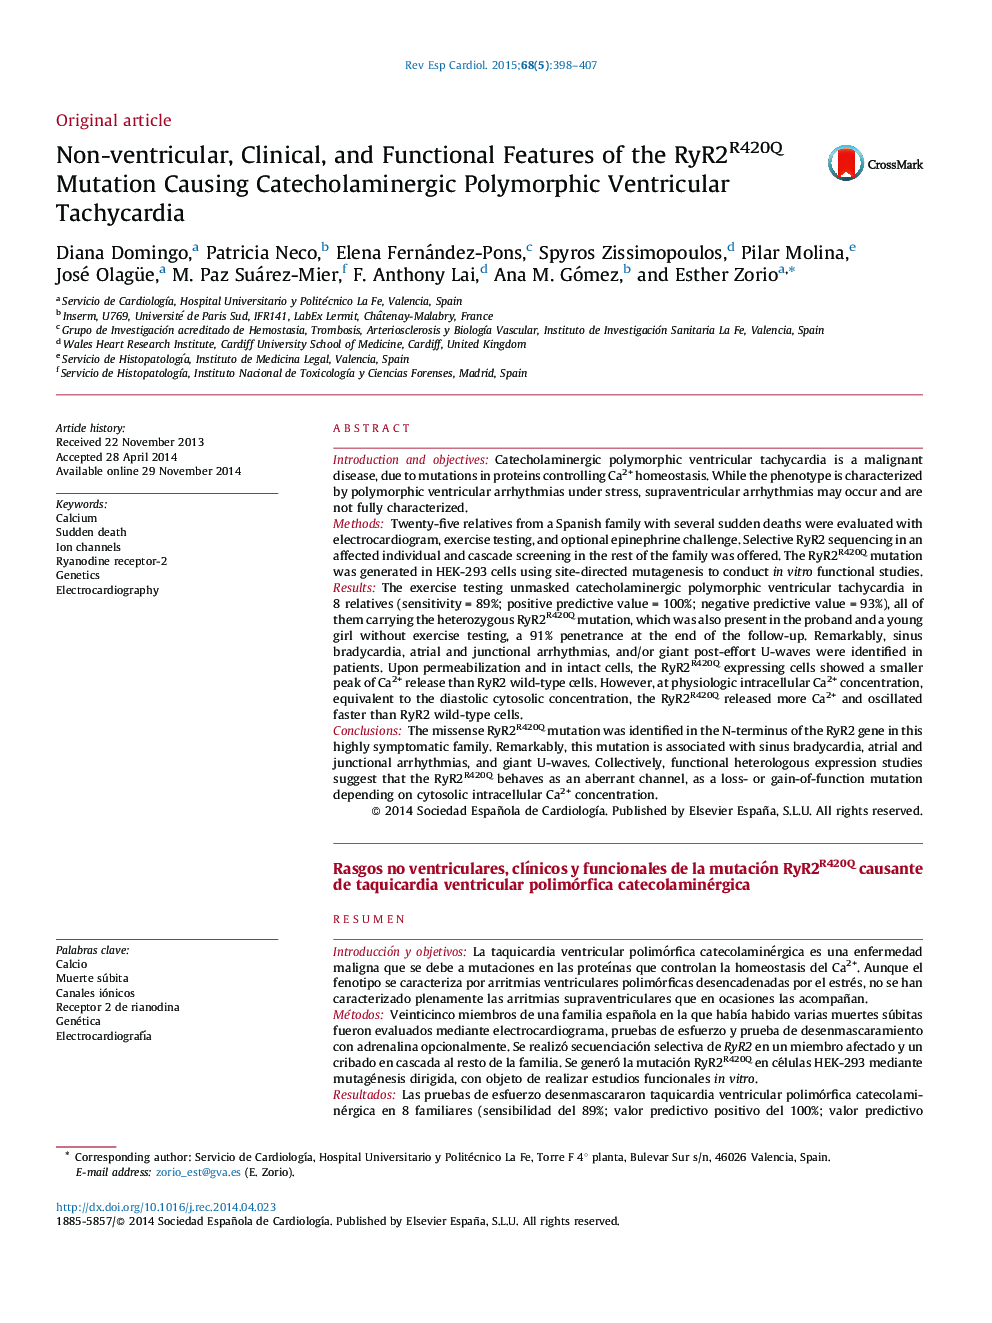 Non-ventricular, Clinical, and Functional Features of the RyR2R420Q Mutation Causing Catecholaminergic Polymorphic Ventricular Tachycardia